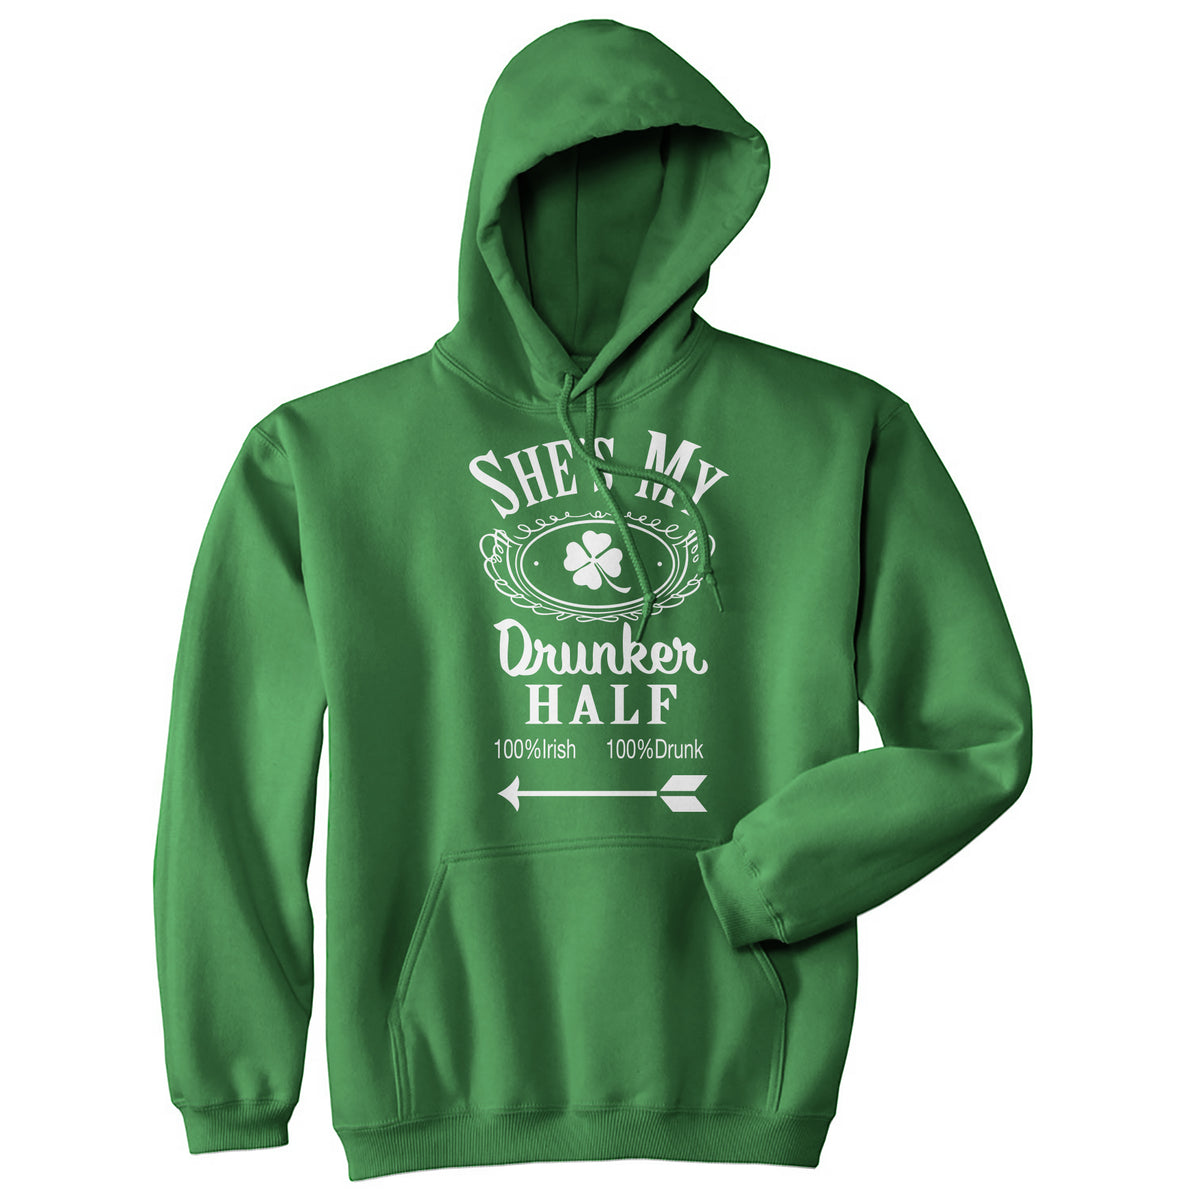 Funny Heather Green - Shes Hes/Shes My Drunker Half Hoodie Hoodie Nerdy Saint Patrick&#39;s Day Drinking Tee